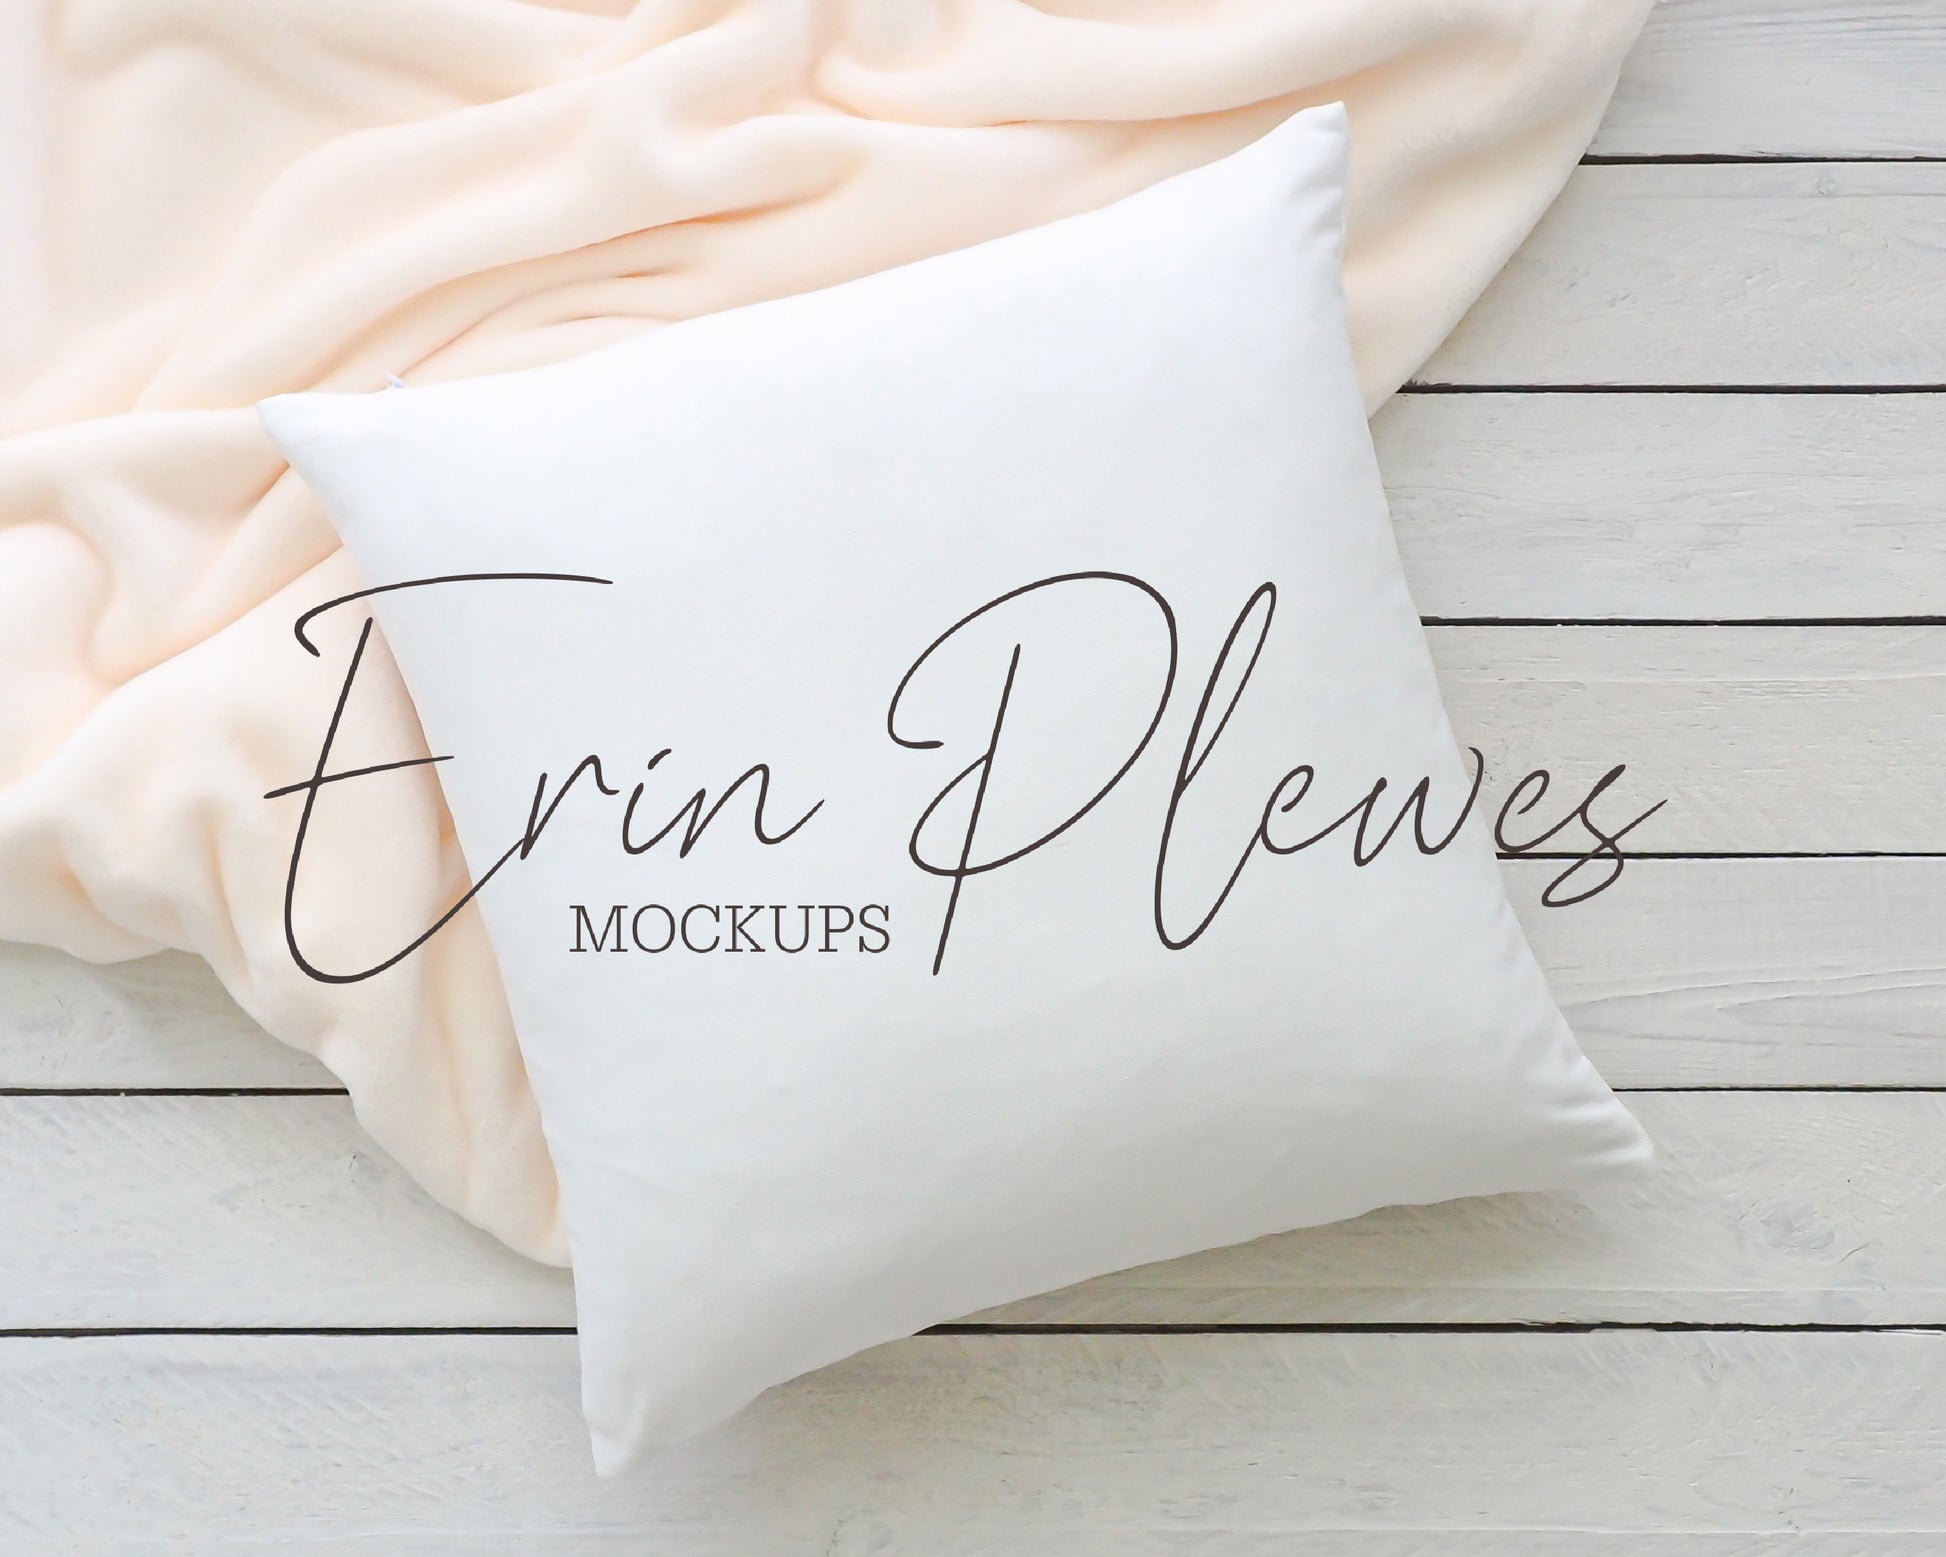 Pillow Case Mockup, Pillow mock-up with cream blanket, Minimalist cushion lifestyle stock photo, Jpeg Instant Digital Download